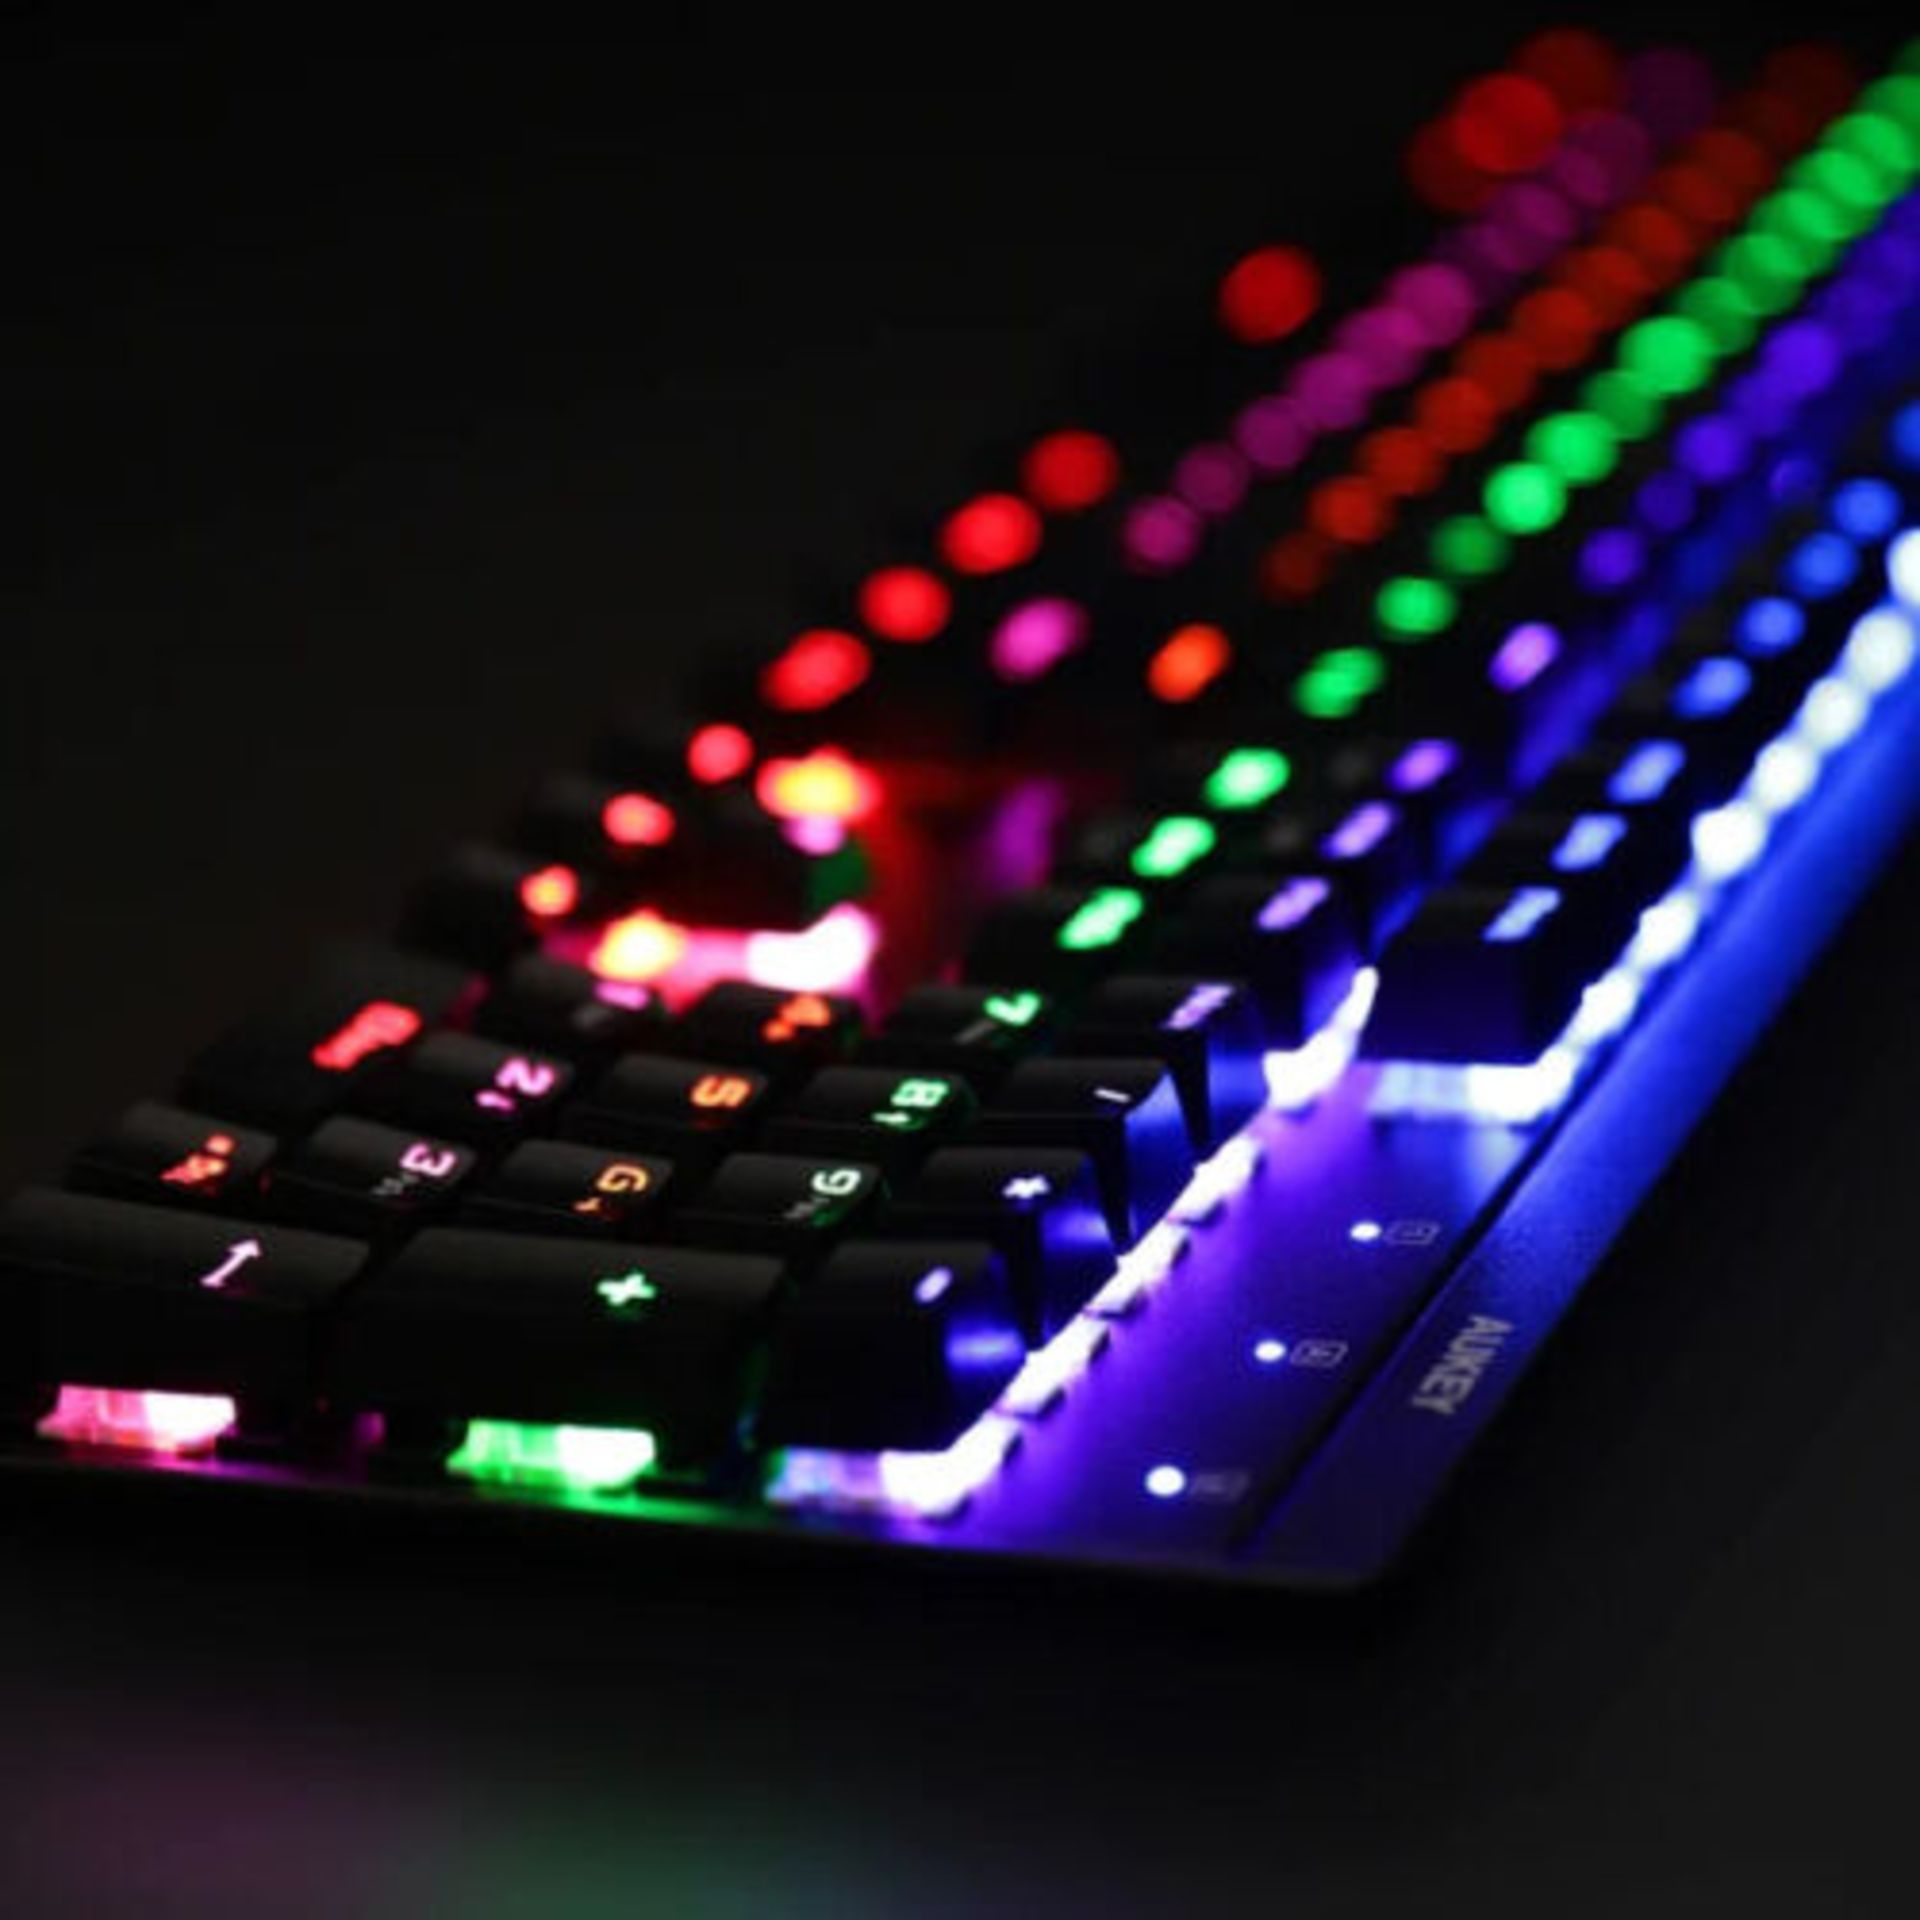 400 X AUKEY KM-G6/G16 WIRED KEYBOARD MECHANICAL FOR WINDOWS GAMING PC 400 PCS - Image 2 of 7